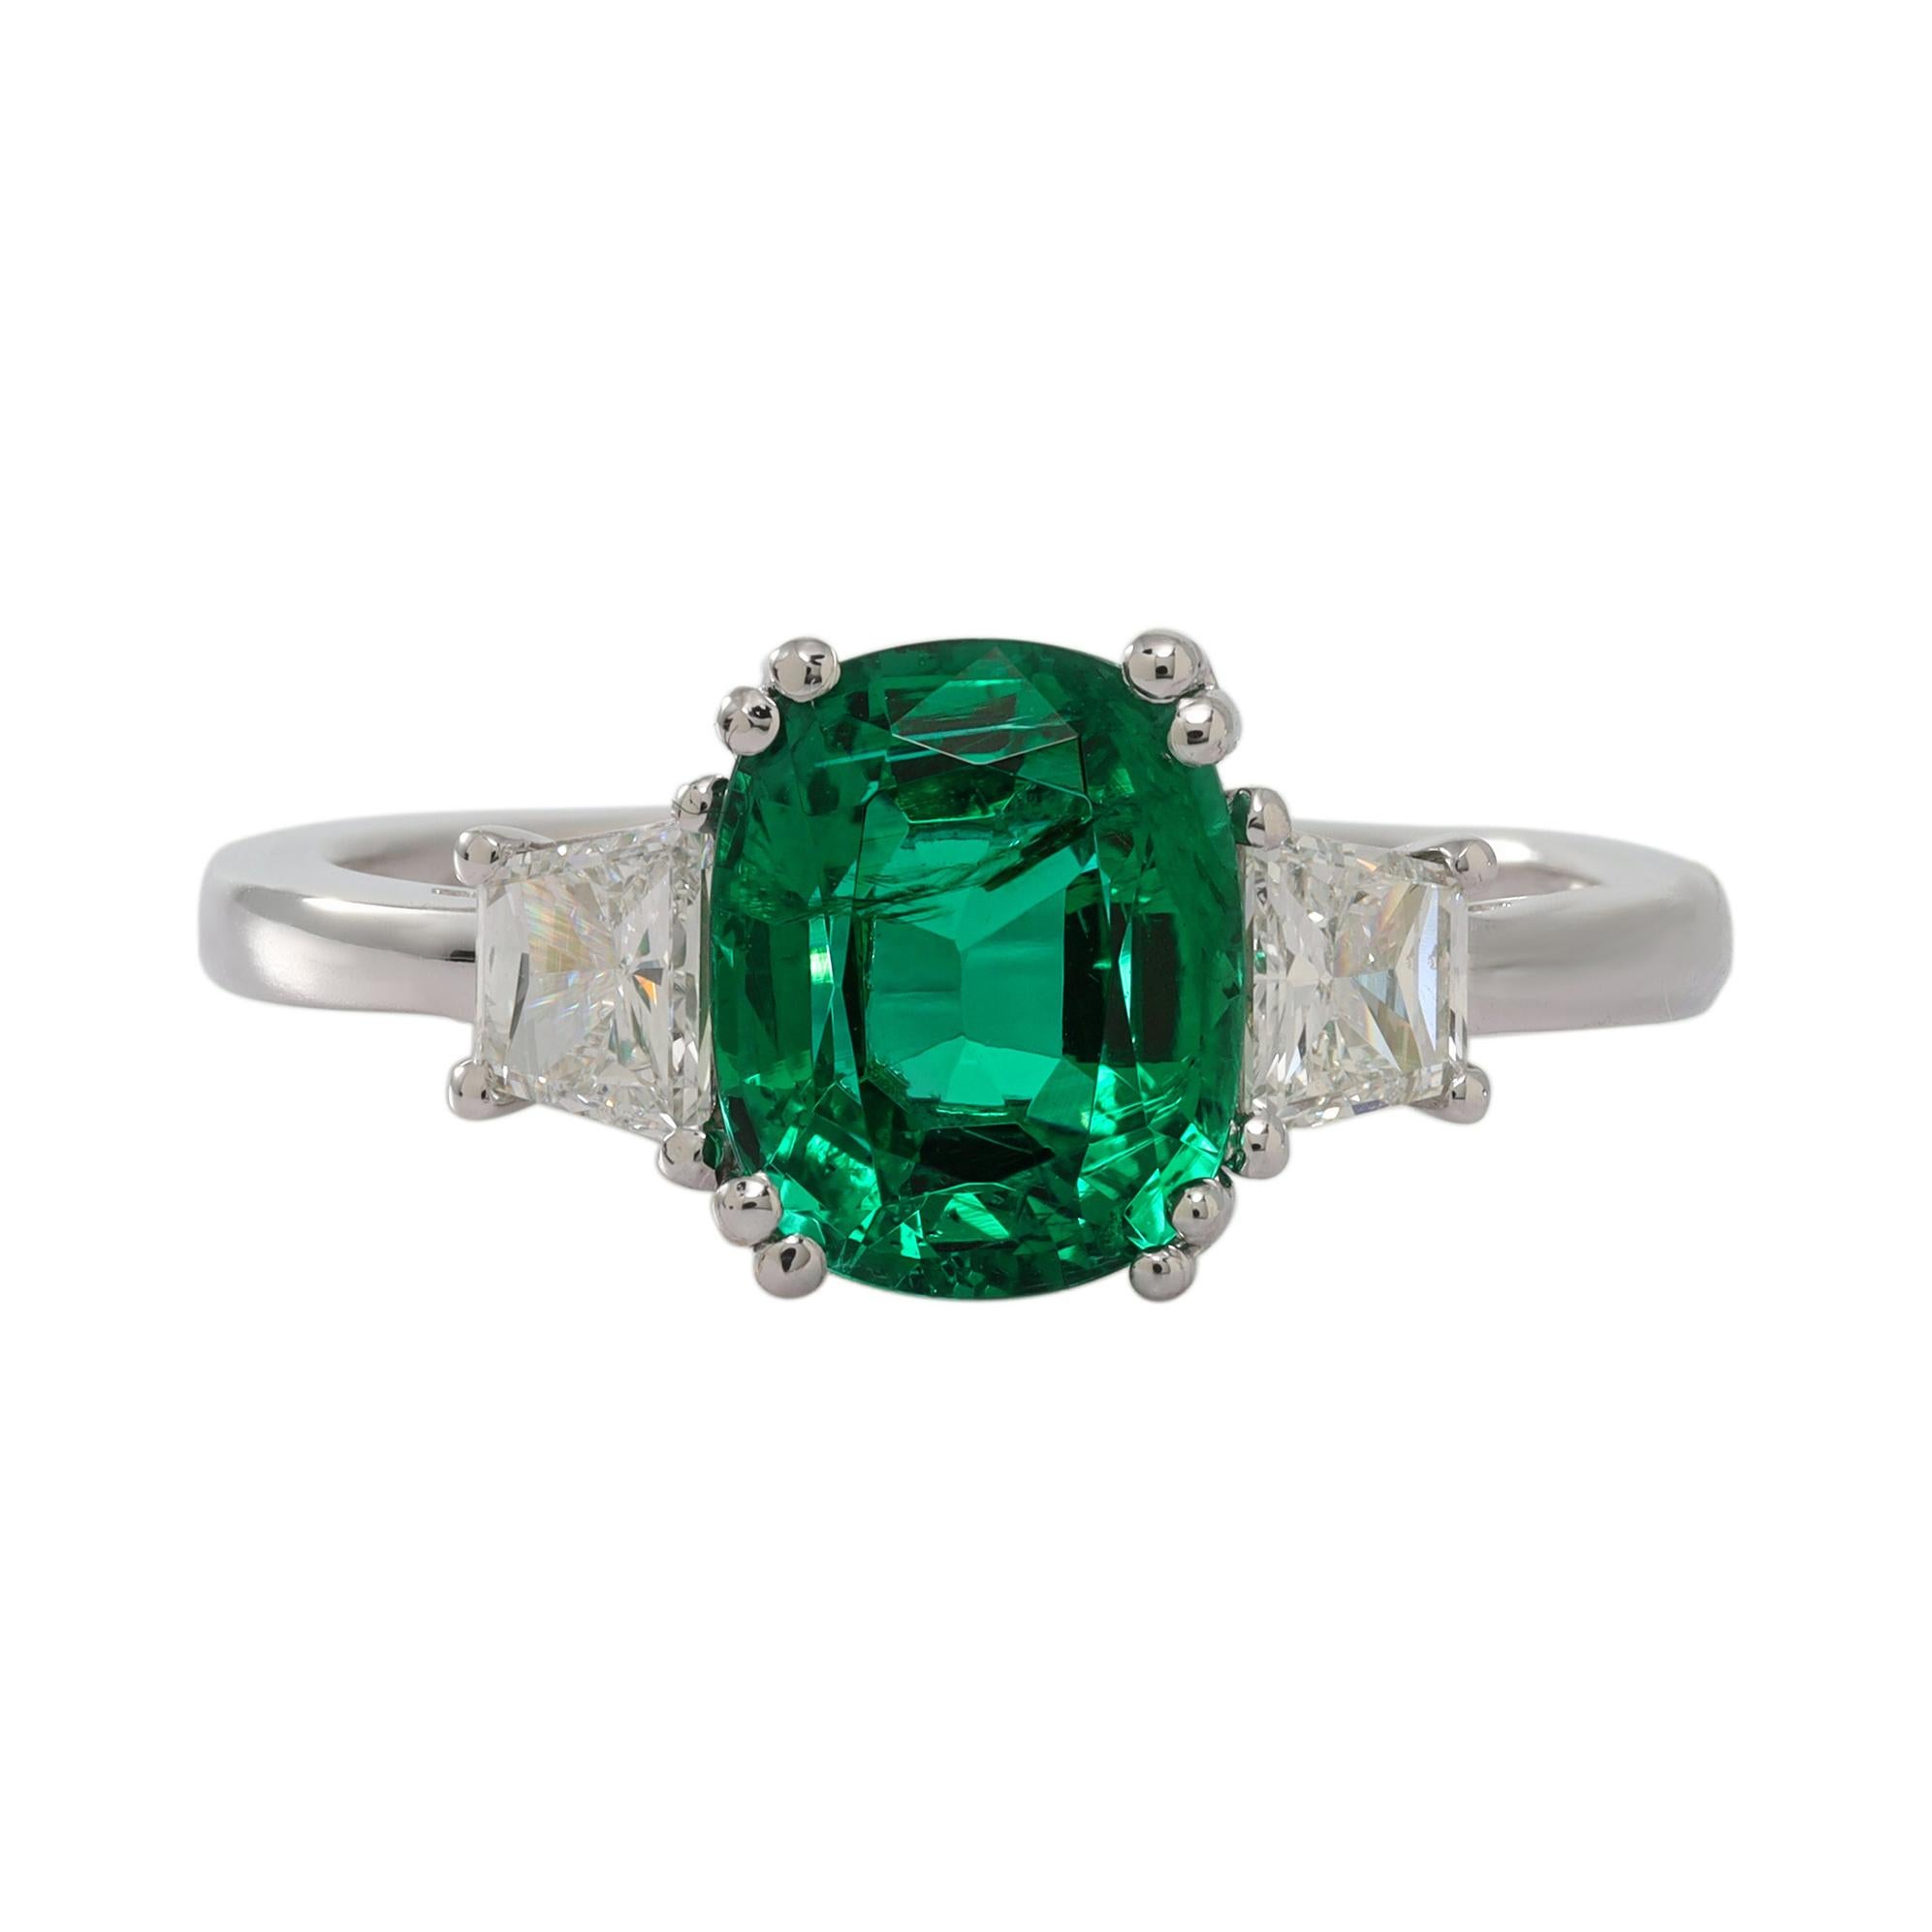 18k Wg Emerald Ring with Tr. Diamond 0.57ct and Emerald 2.05ct